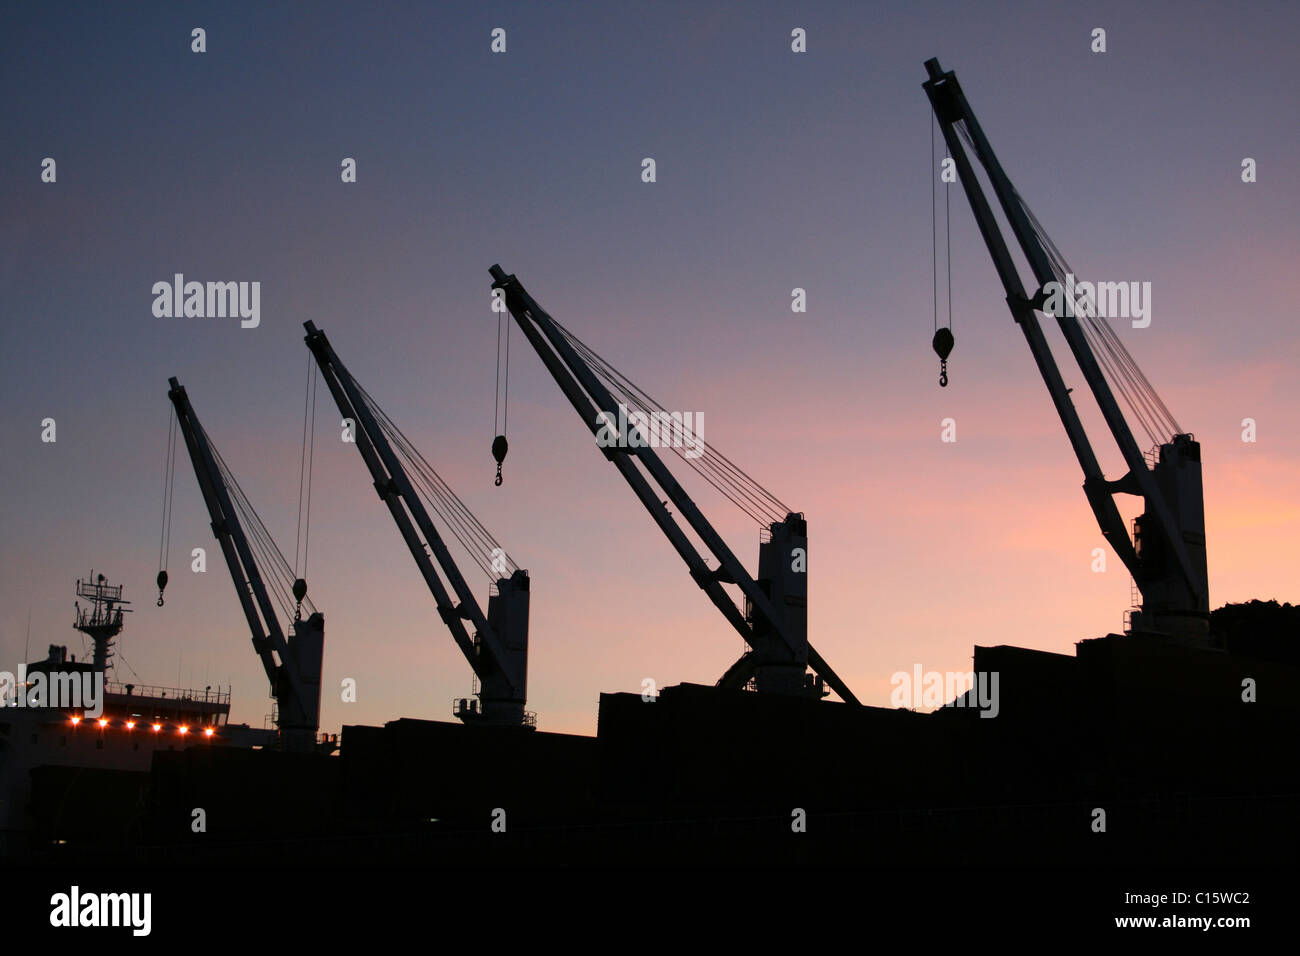 Ship Cranes Silhouetted At Sunset, Liverpool Docks, UK Stock Photo